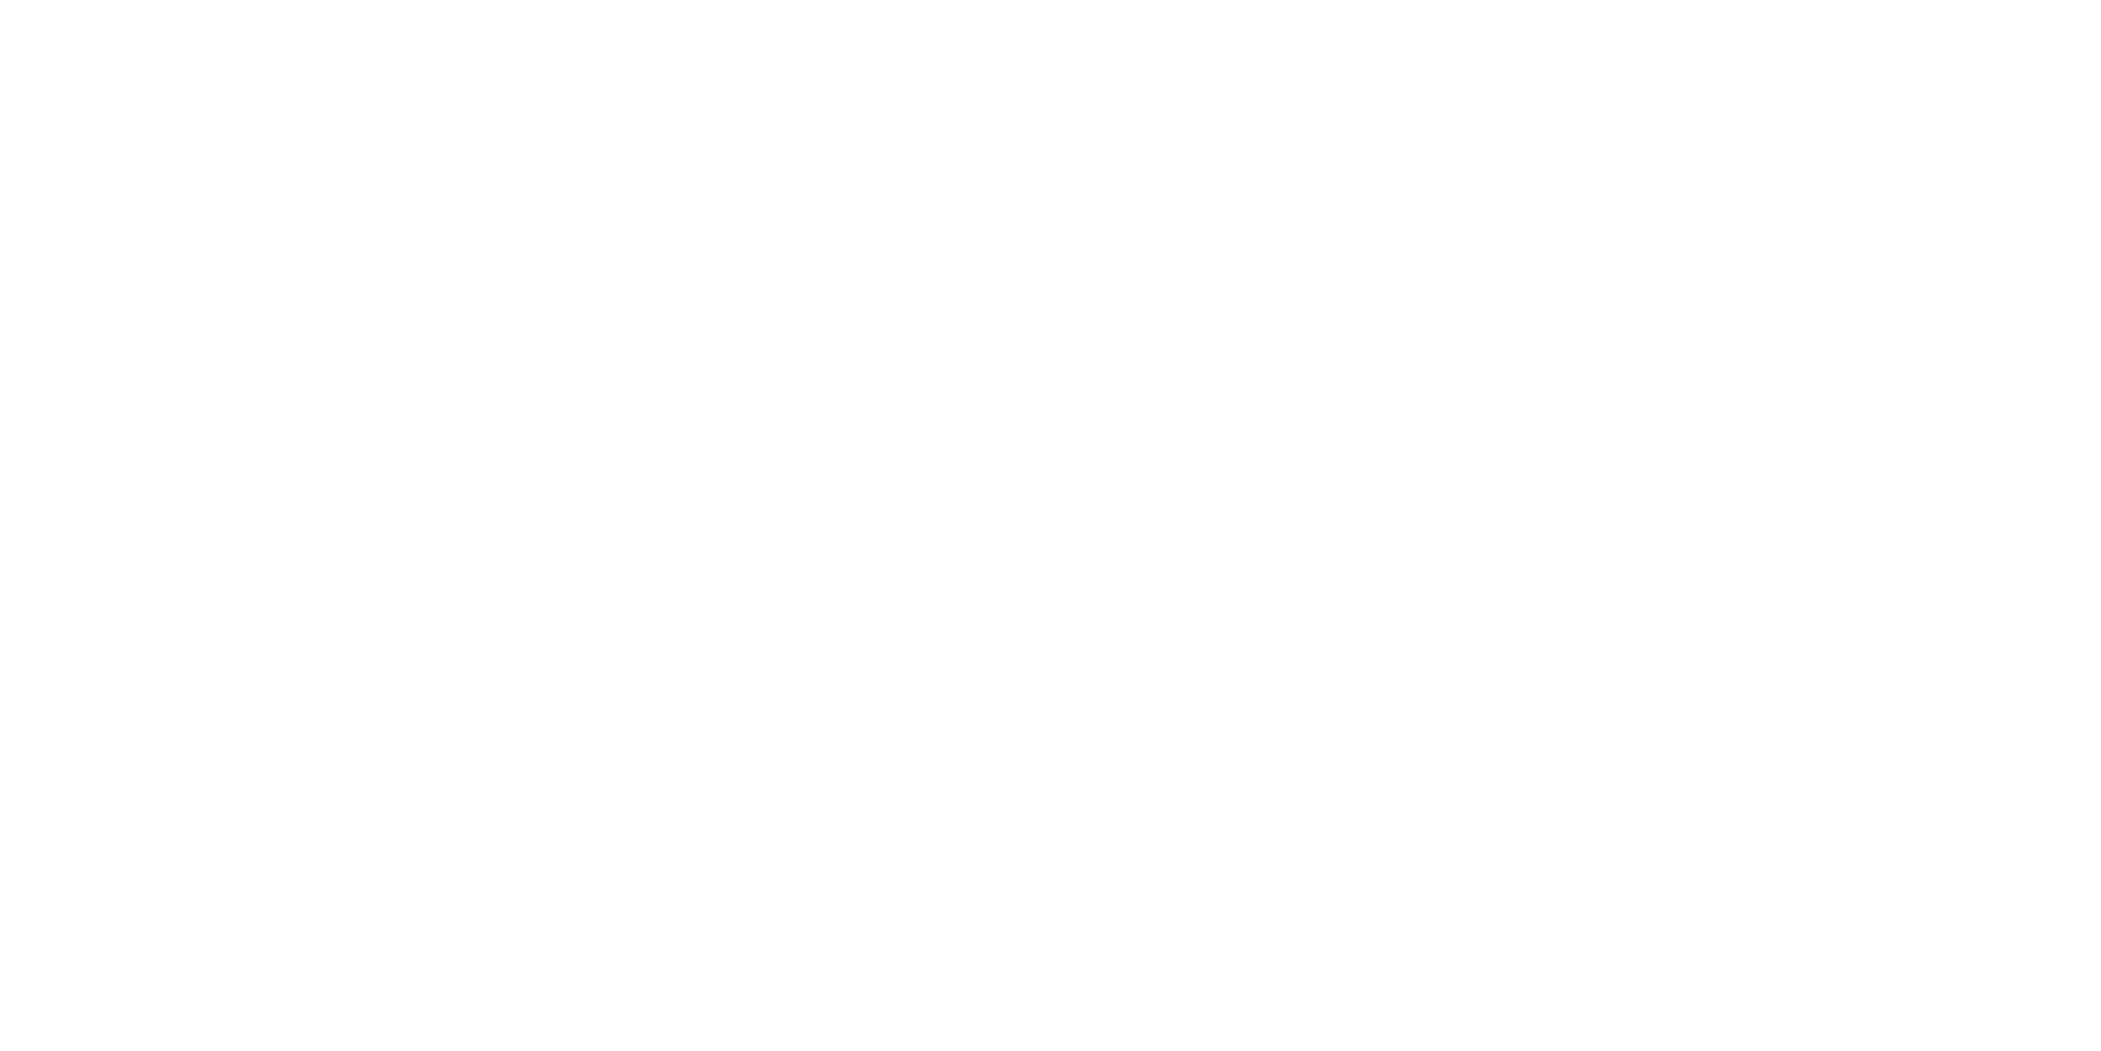 2021-official-selection-reverse (1).png